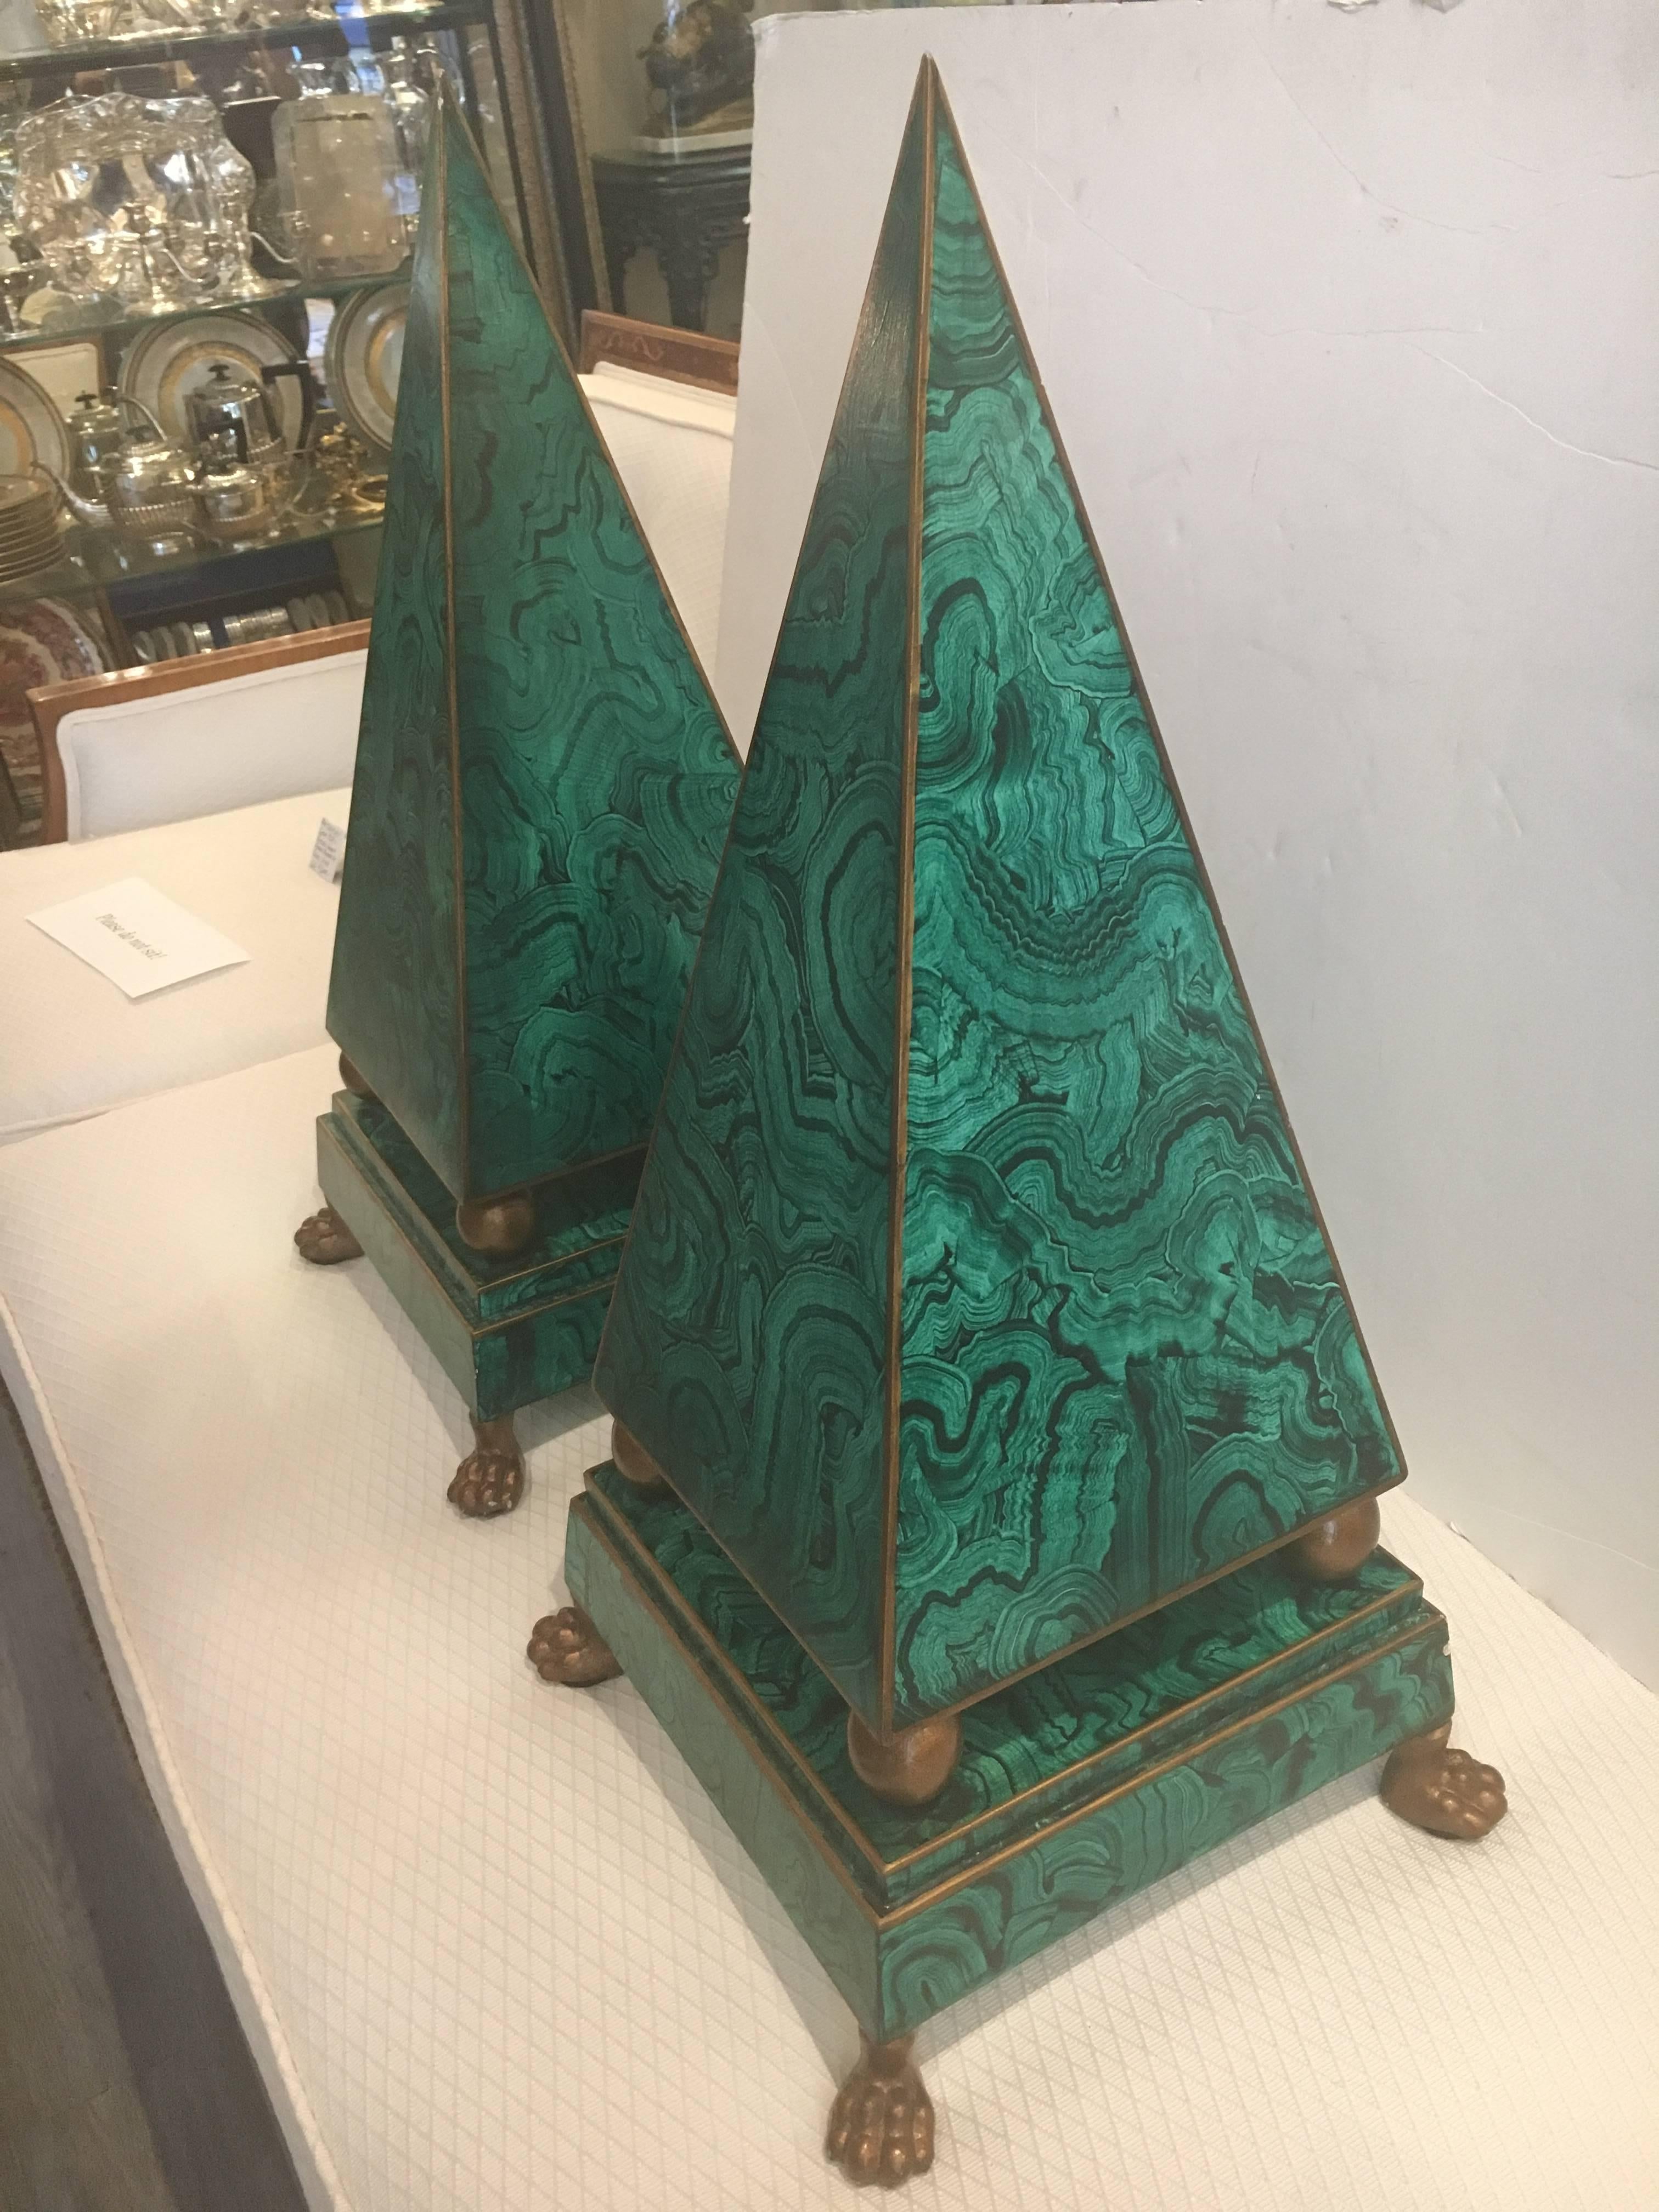 Ultra chic faux malachite obelisks in the style of Tony Duquette. Hand-painted in a rich, emerald green malachite with gilt edges, obelisks are made of wood with brass lion paw feet.